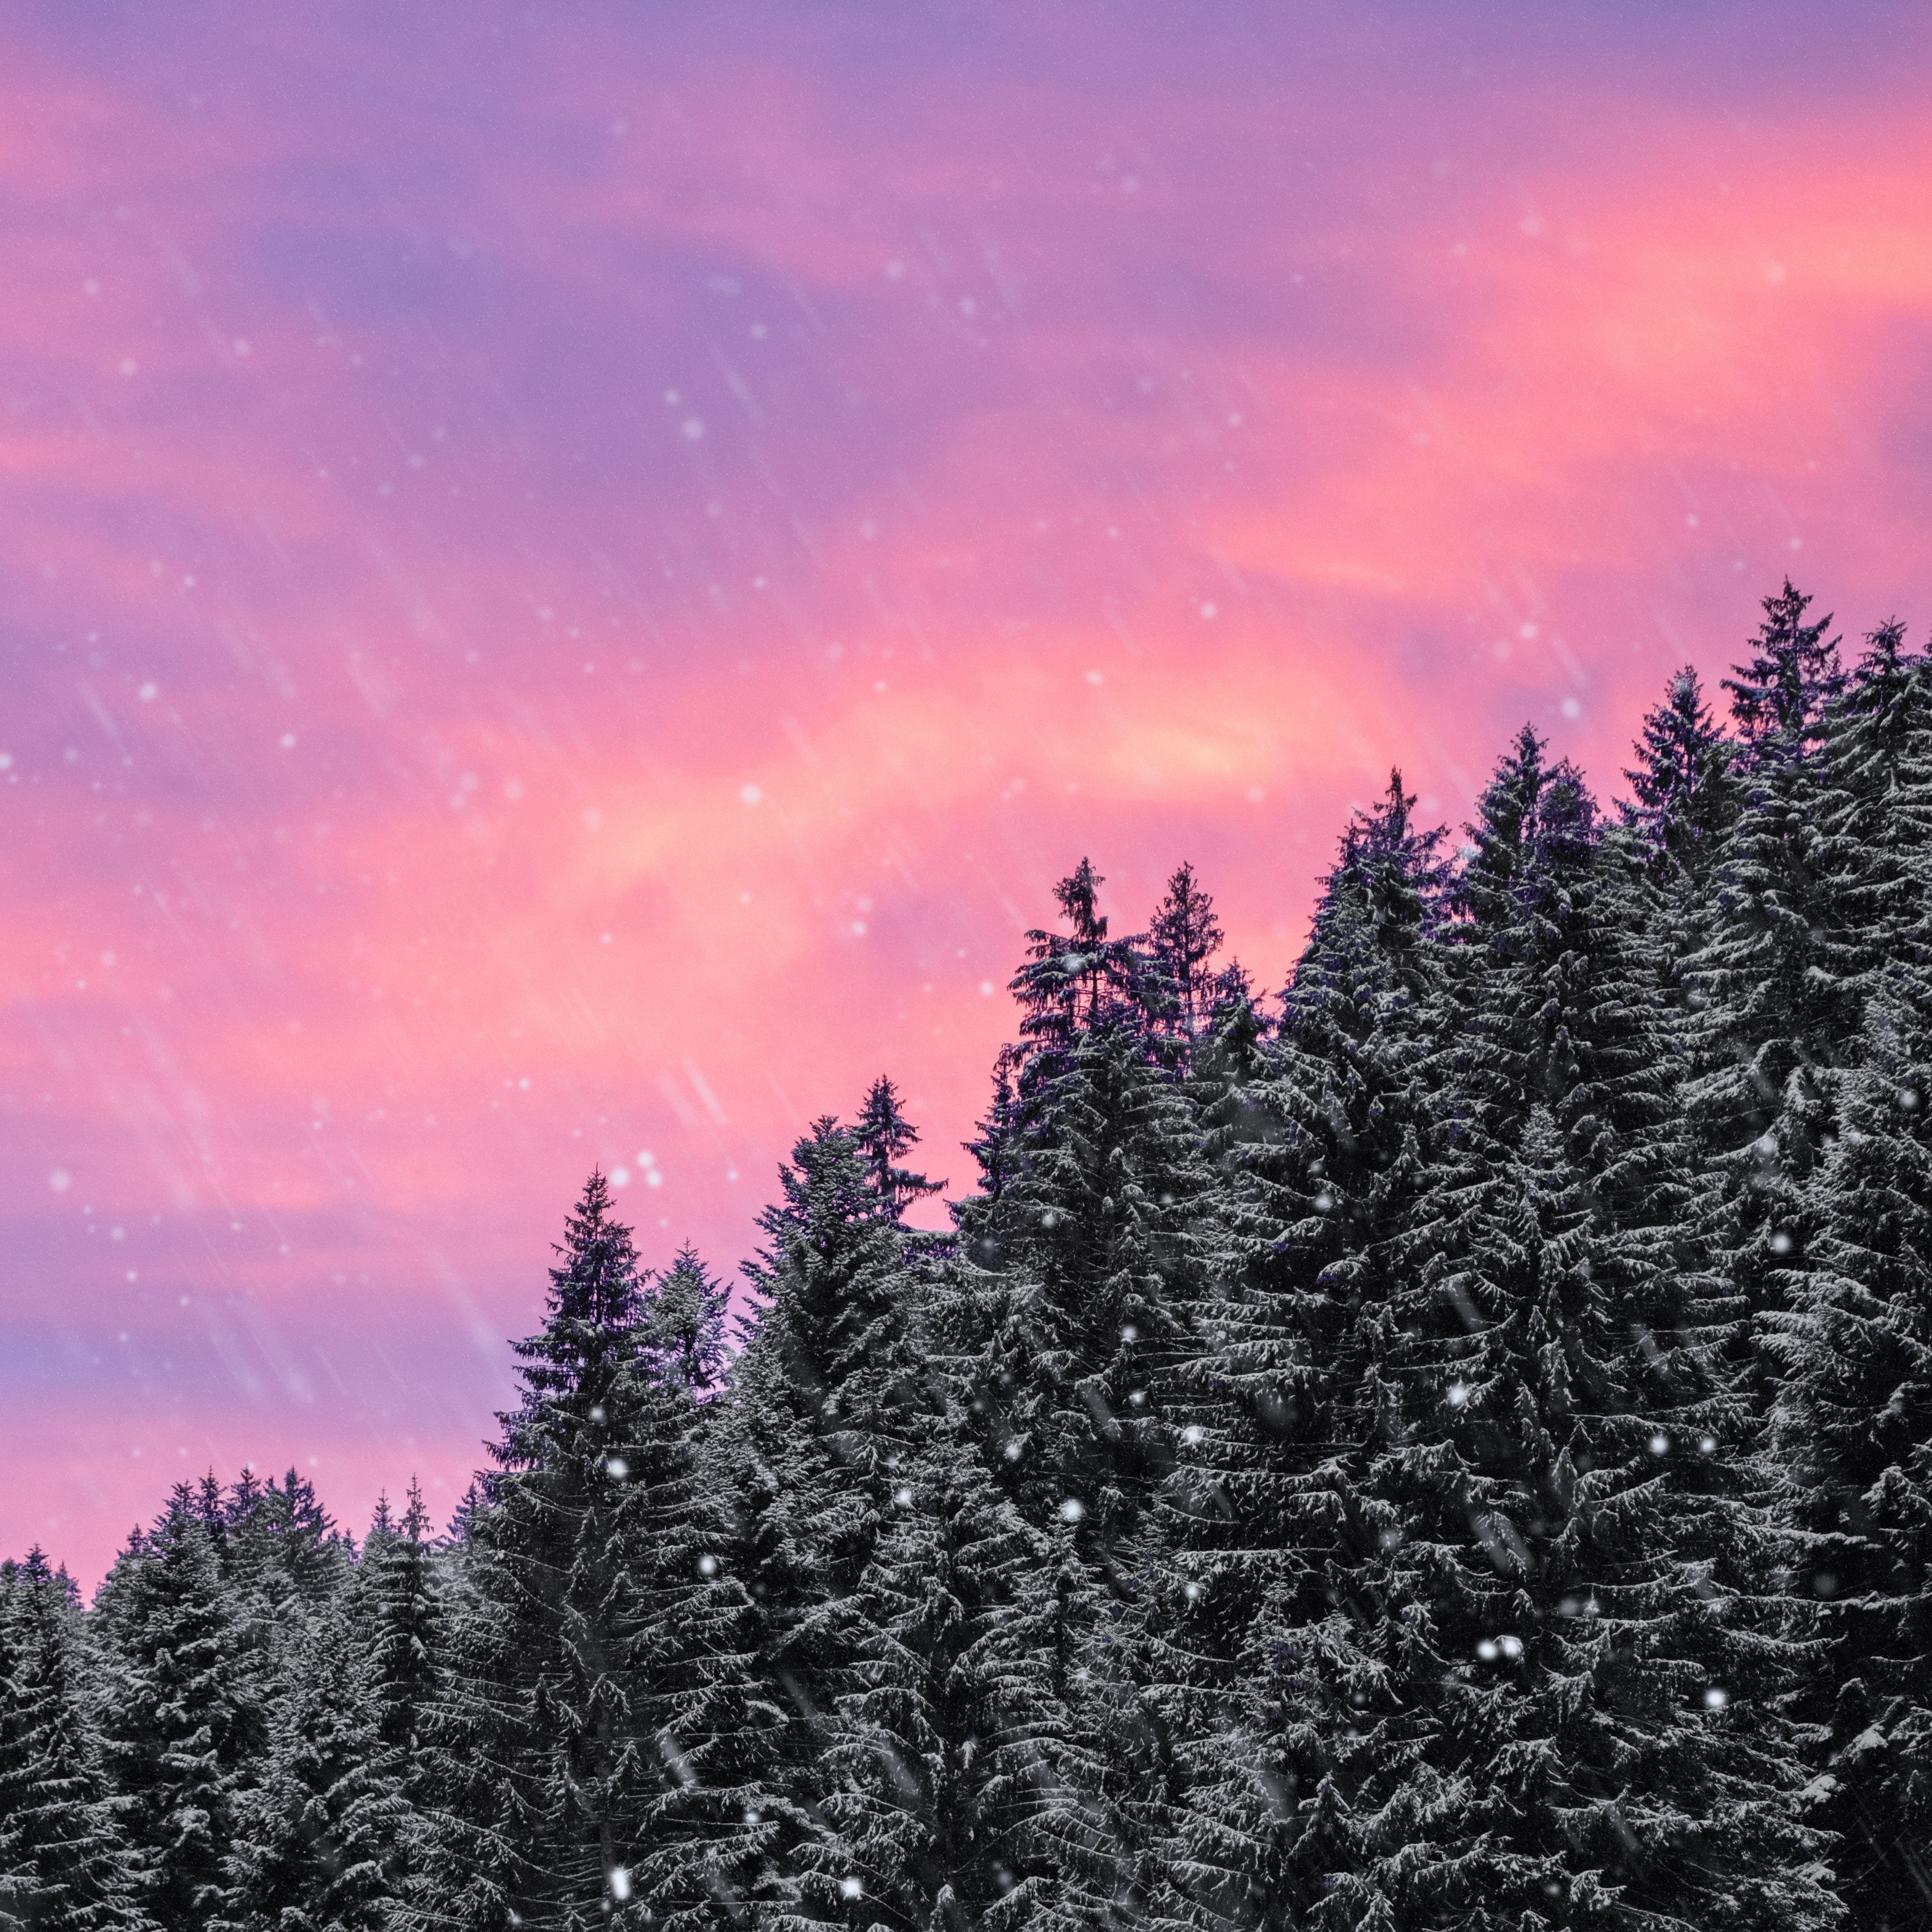 Download wallpaper 3415x3415 spruce, snow, snowfall, sky, winter, forest ipad pro 12.9 retina for parallax HD background